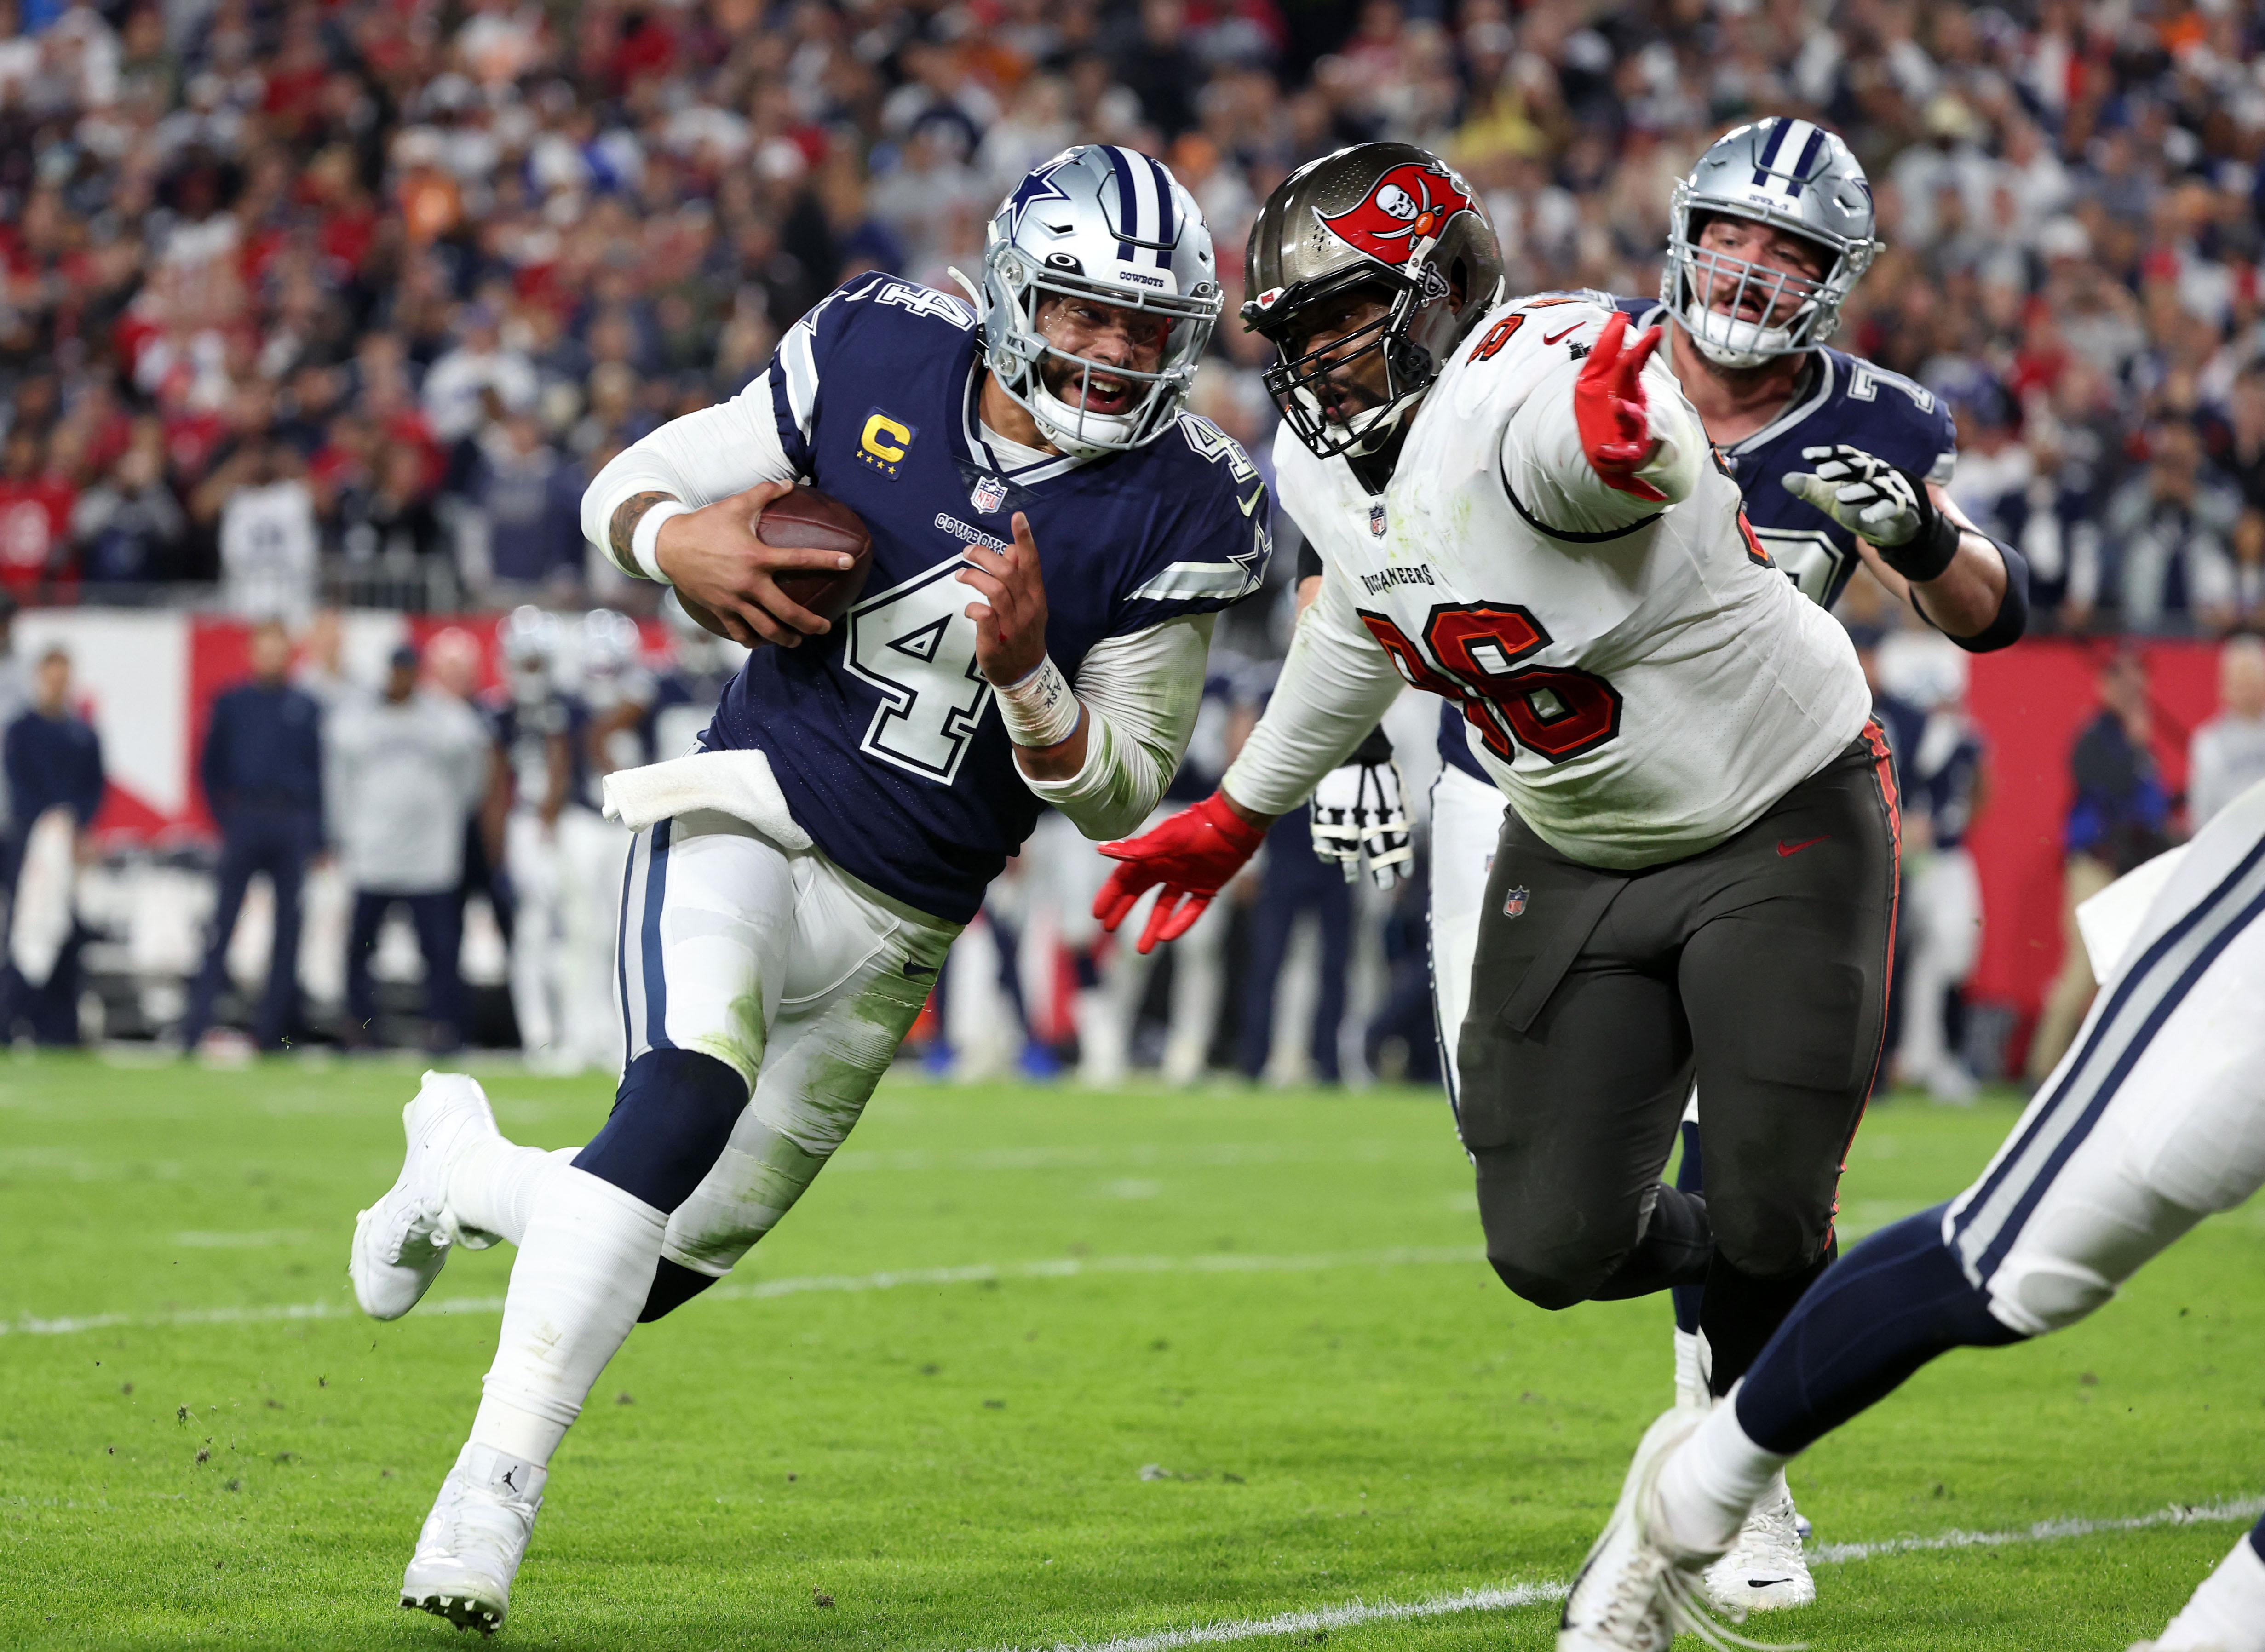 Jan 16, 2023; Tampa, Florida, USA; Dallas Cowboys quarterback Dak Prescott (4) rushes the ball for a touchdown against the Tampa Bay Buccaneers in the first half during the wild card game at Raymond James Stadium. Mandatory Credit: Kim Klement-USA TODAY Sports